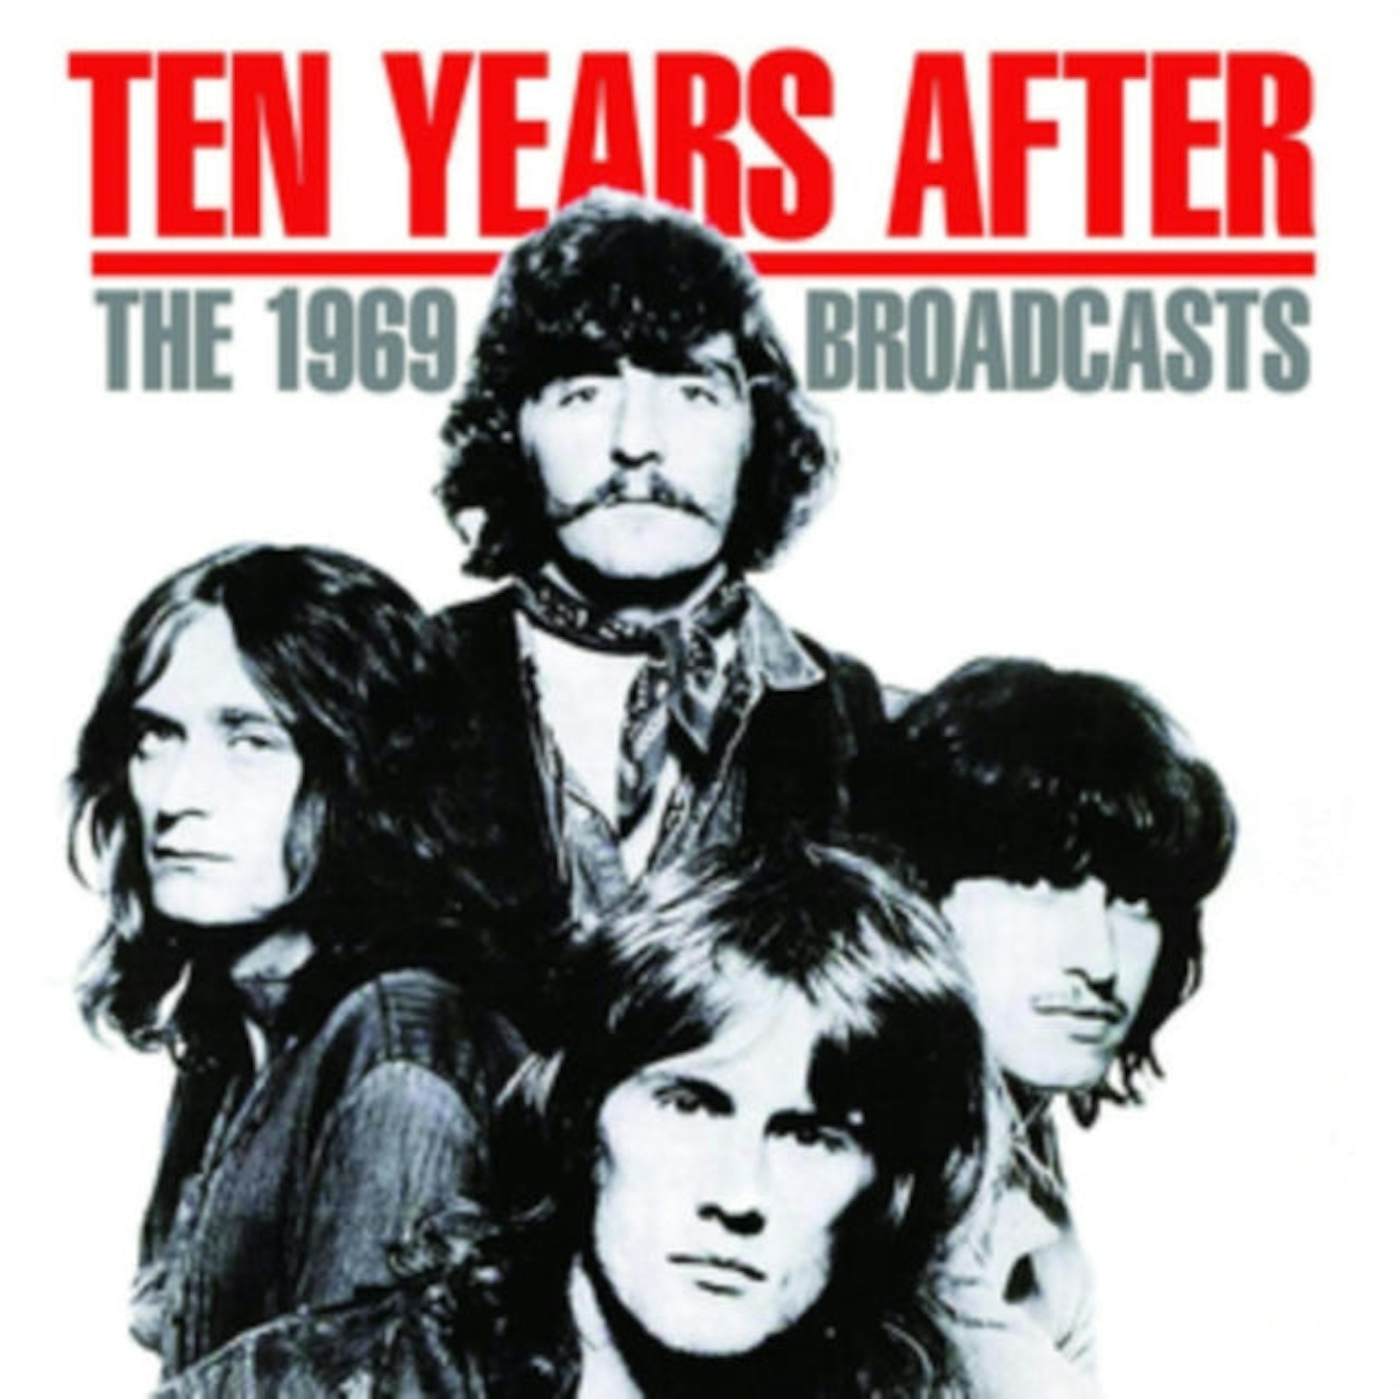 Ten Years After CD - The 1969 Broadcasts